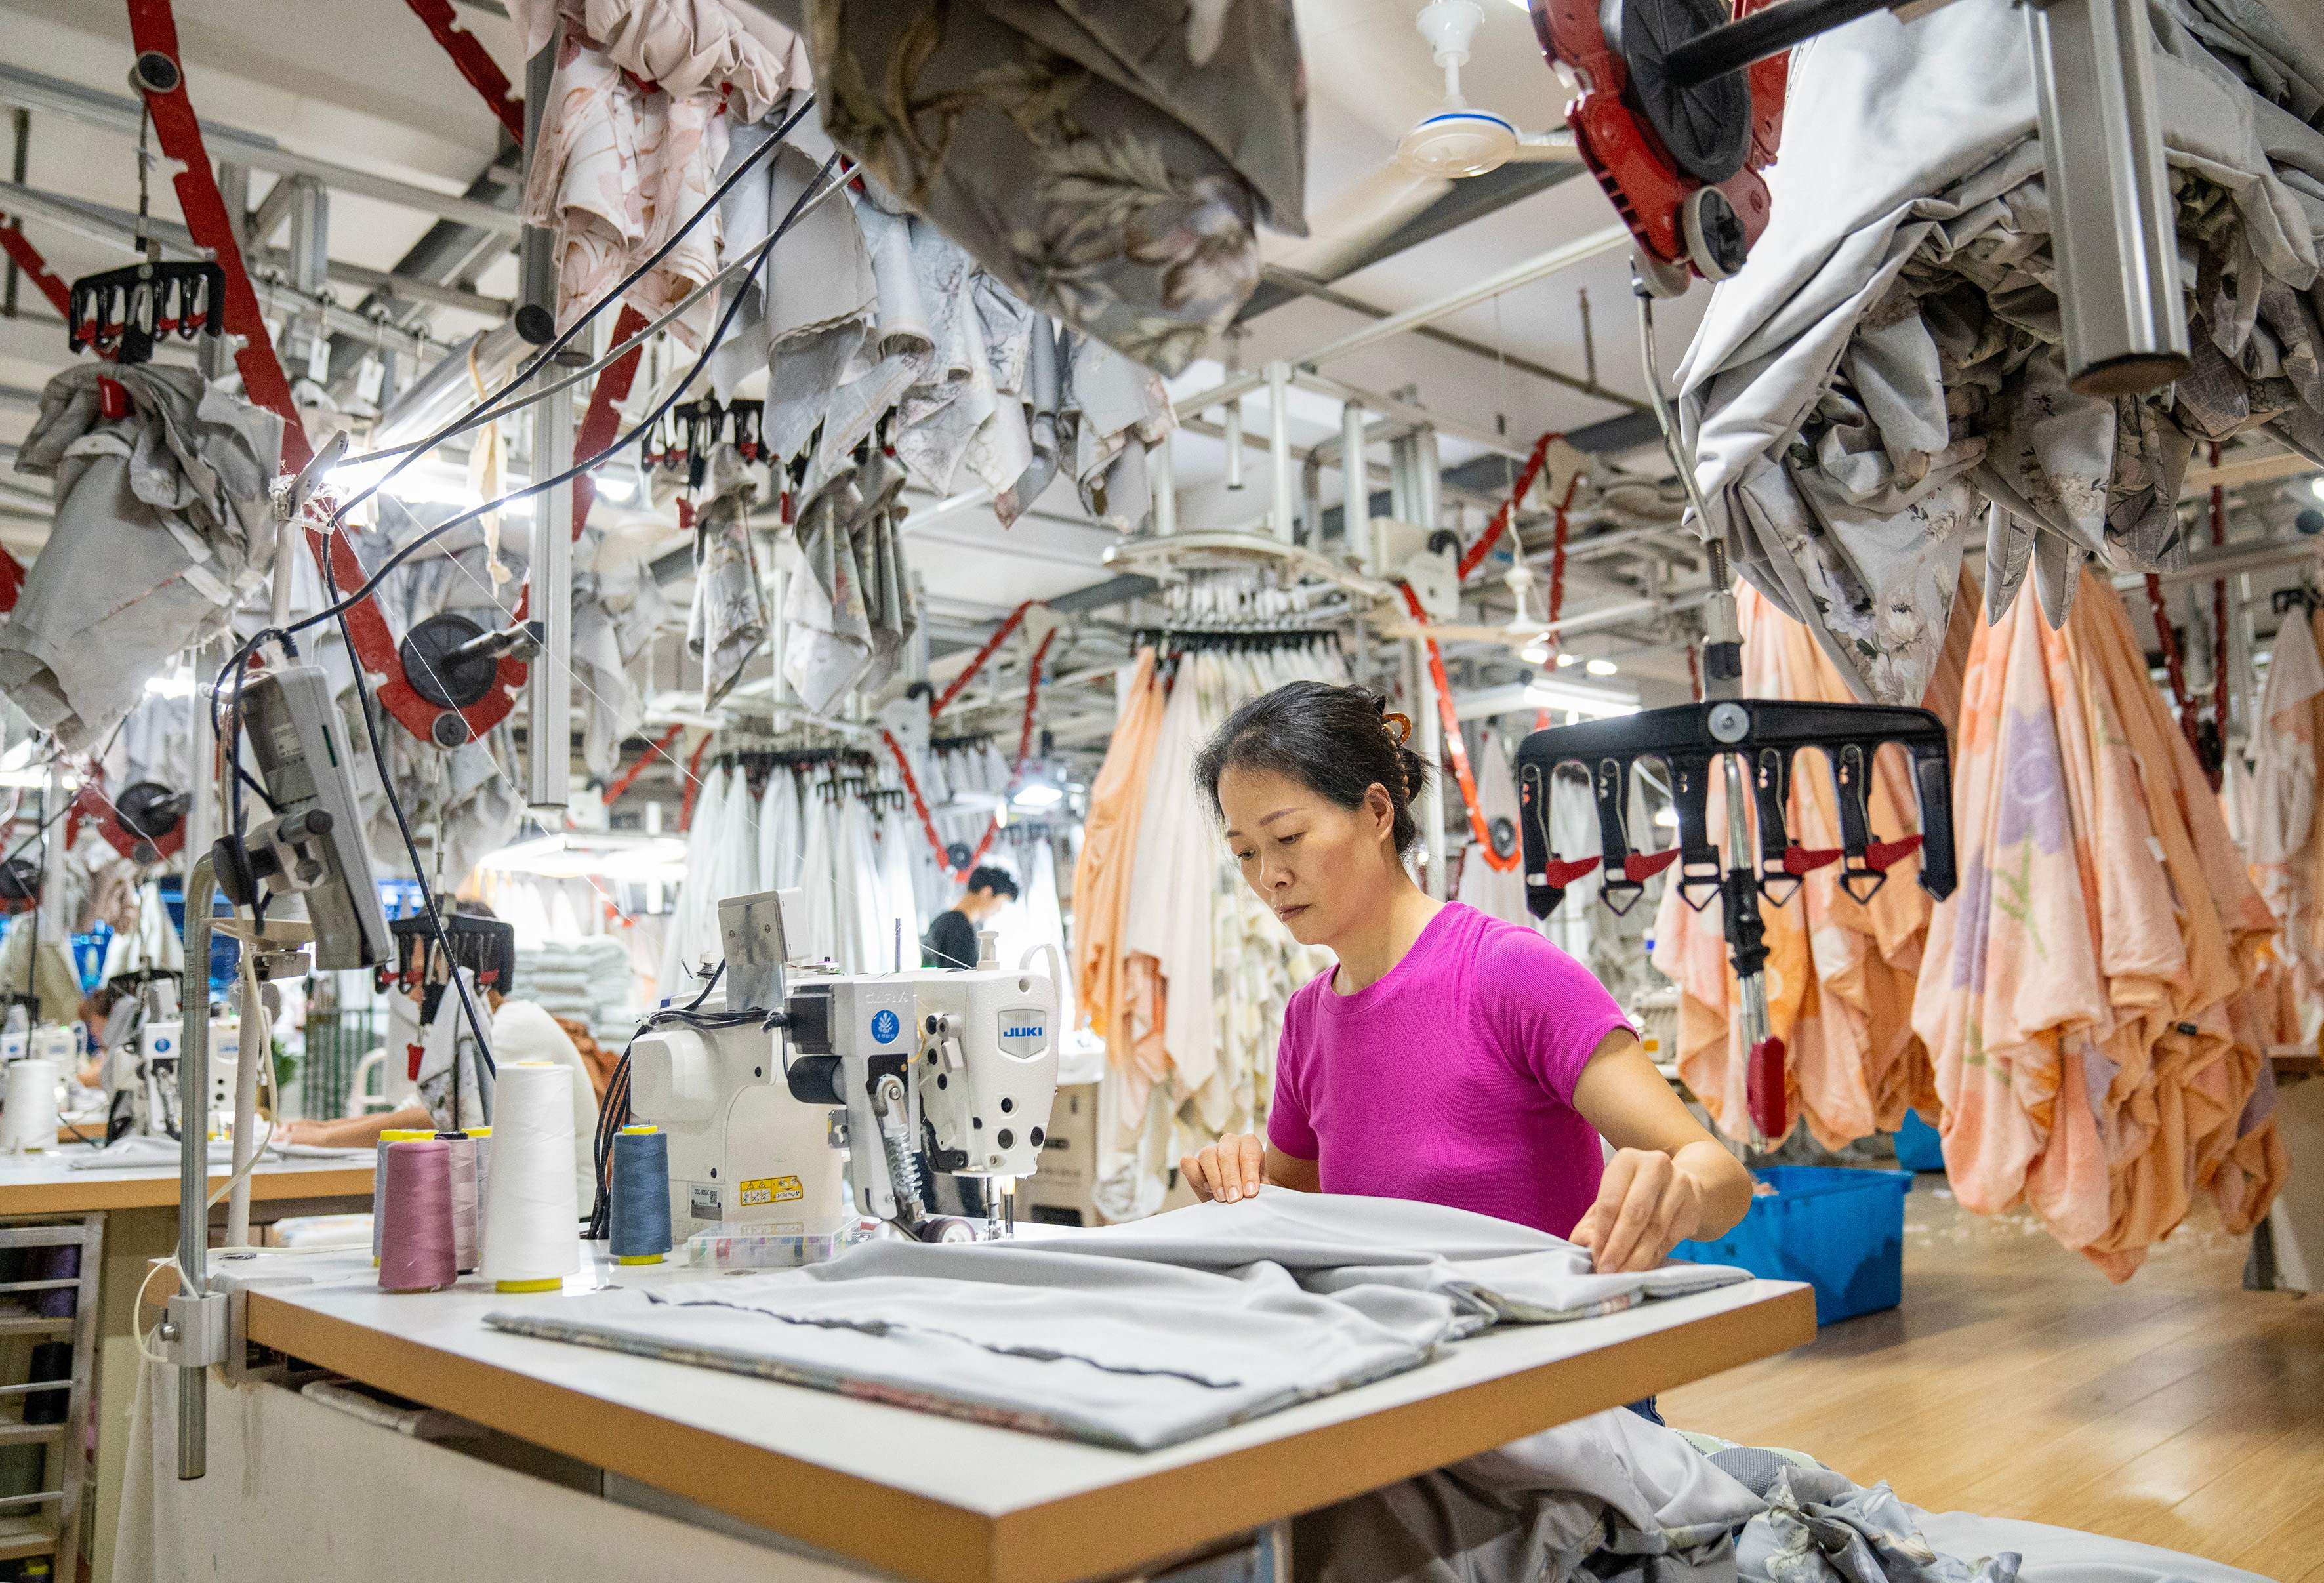 An employee works at a textile factory in Nantong, in eastern Jiangsu province, on June 25. Sentiment towards China’s economy has improved this year amid signs of economic stabilisation and more forceful stimulus measures. Photo: AFP